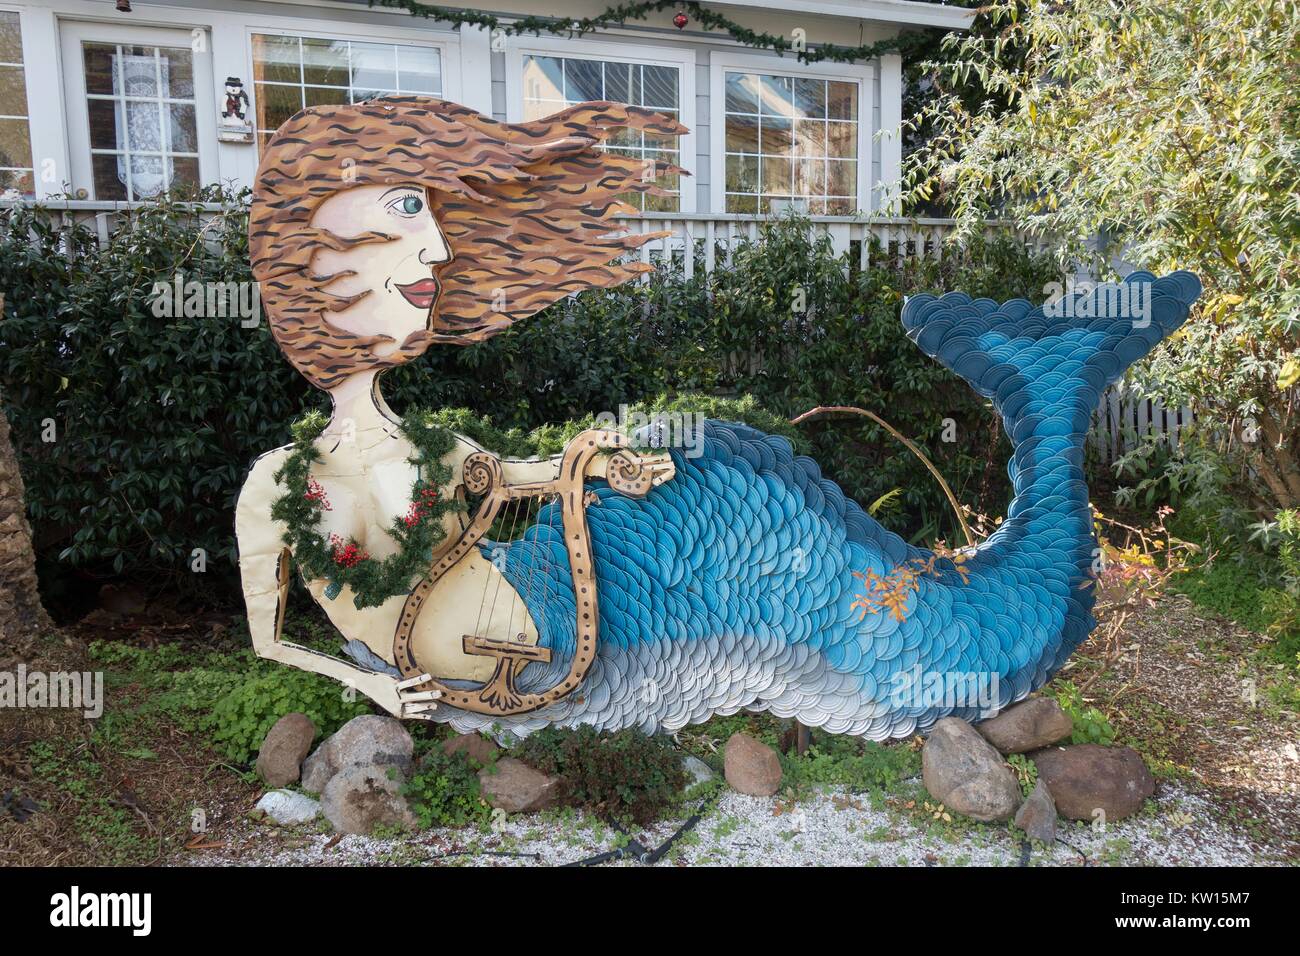 A mermaid sculpture by artist Patrick Amiot, on display in front of a home on Florence Avenue in Sebastopol, Ca, USA. Stock Photo